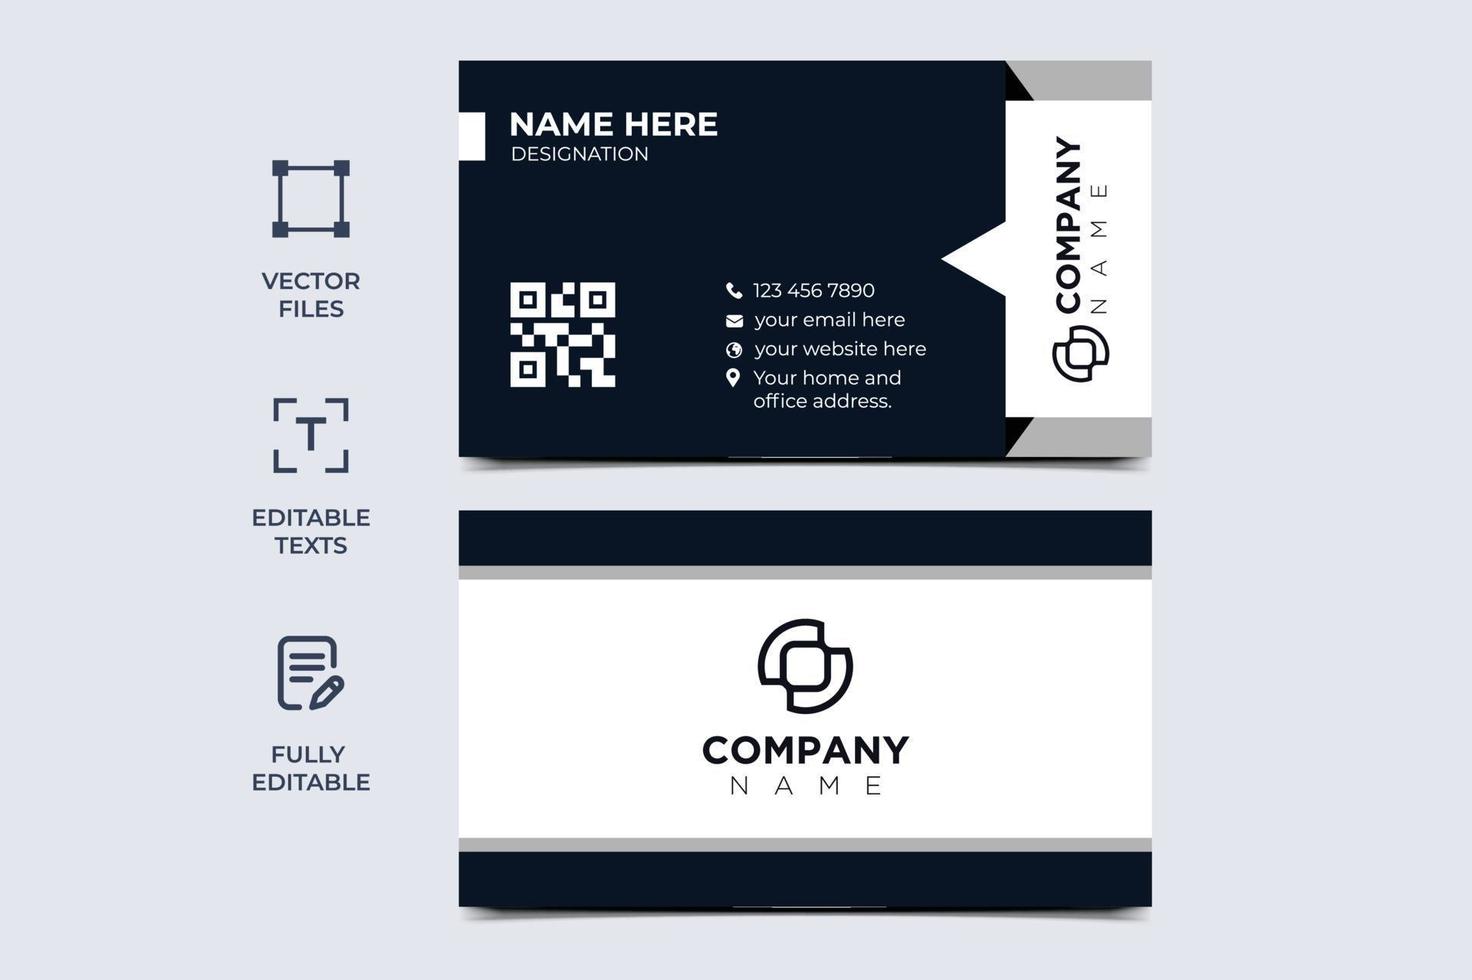 Envelope style business card design vector template